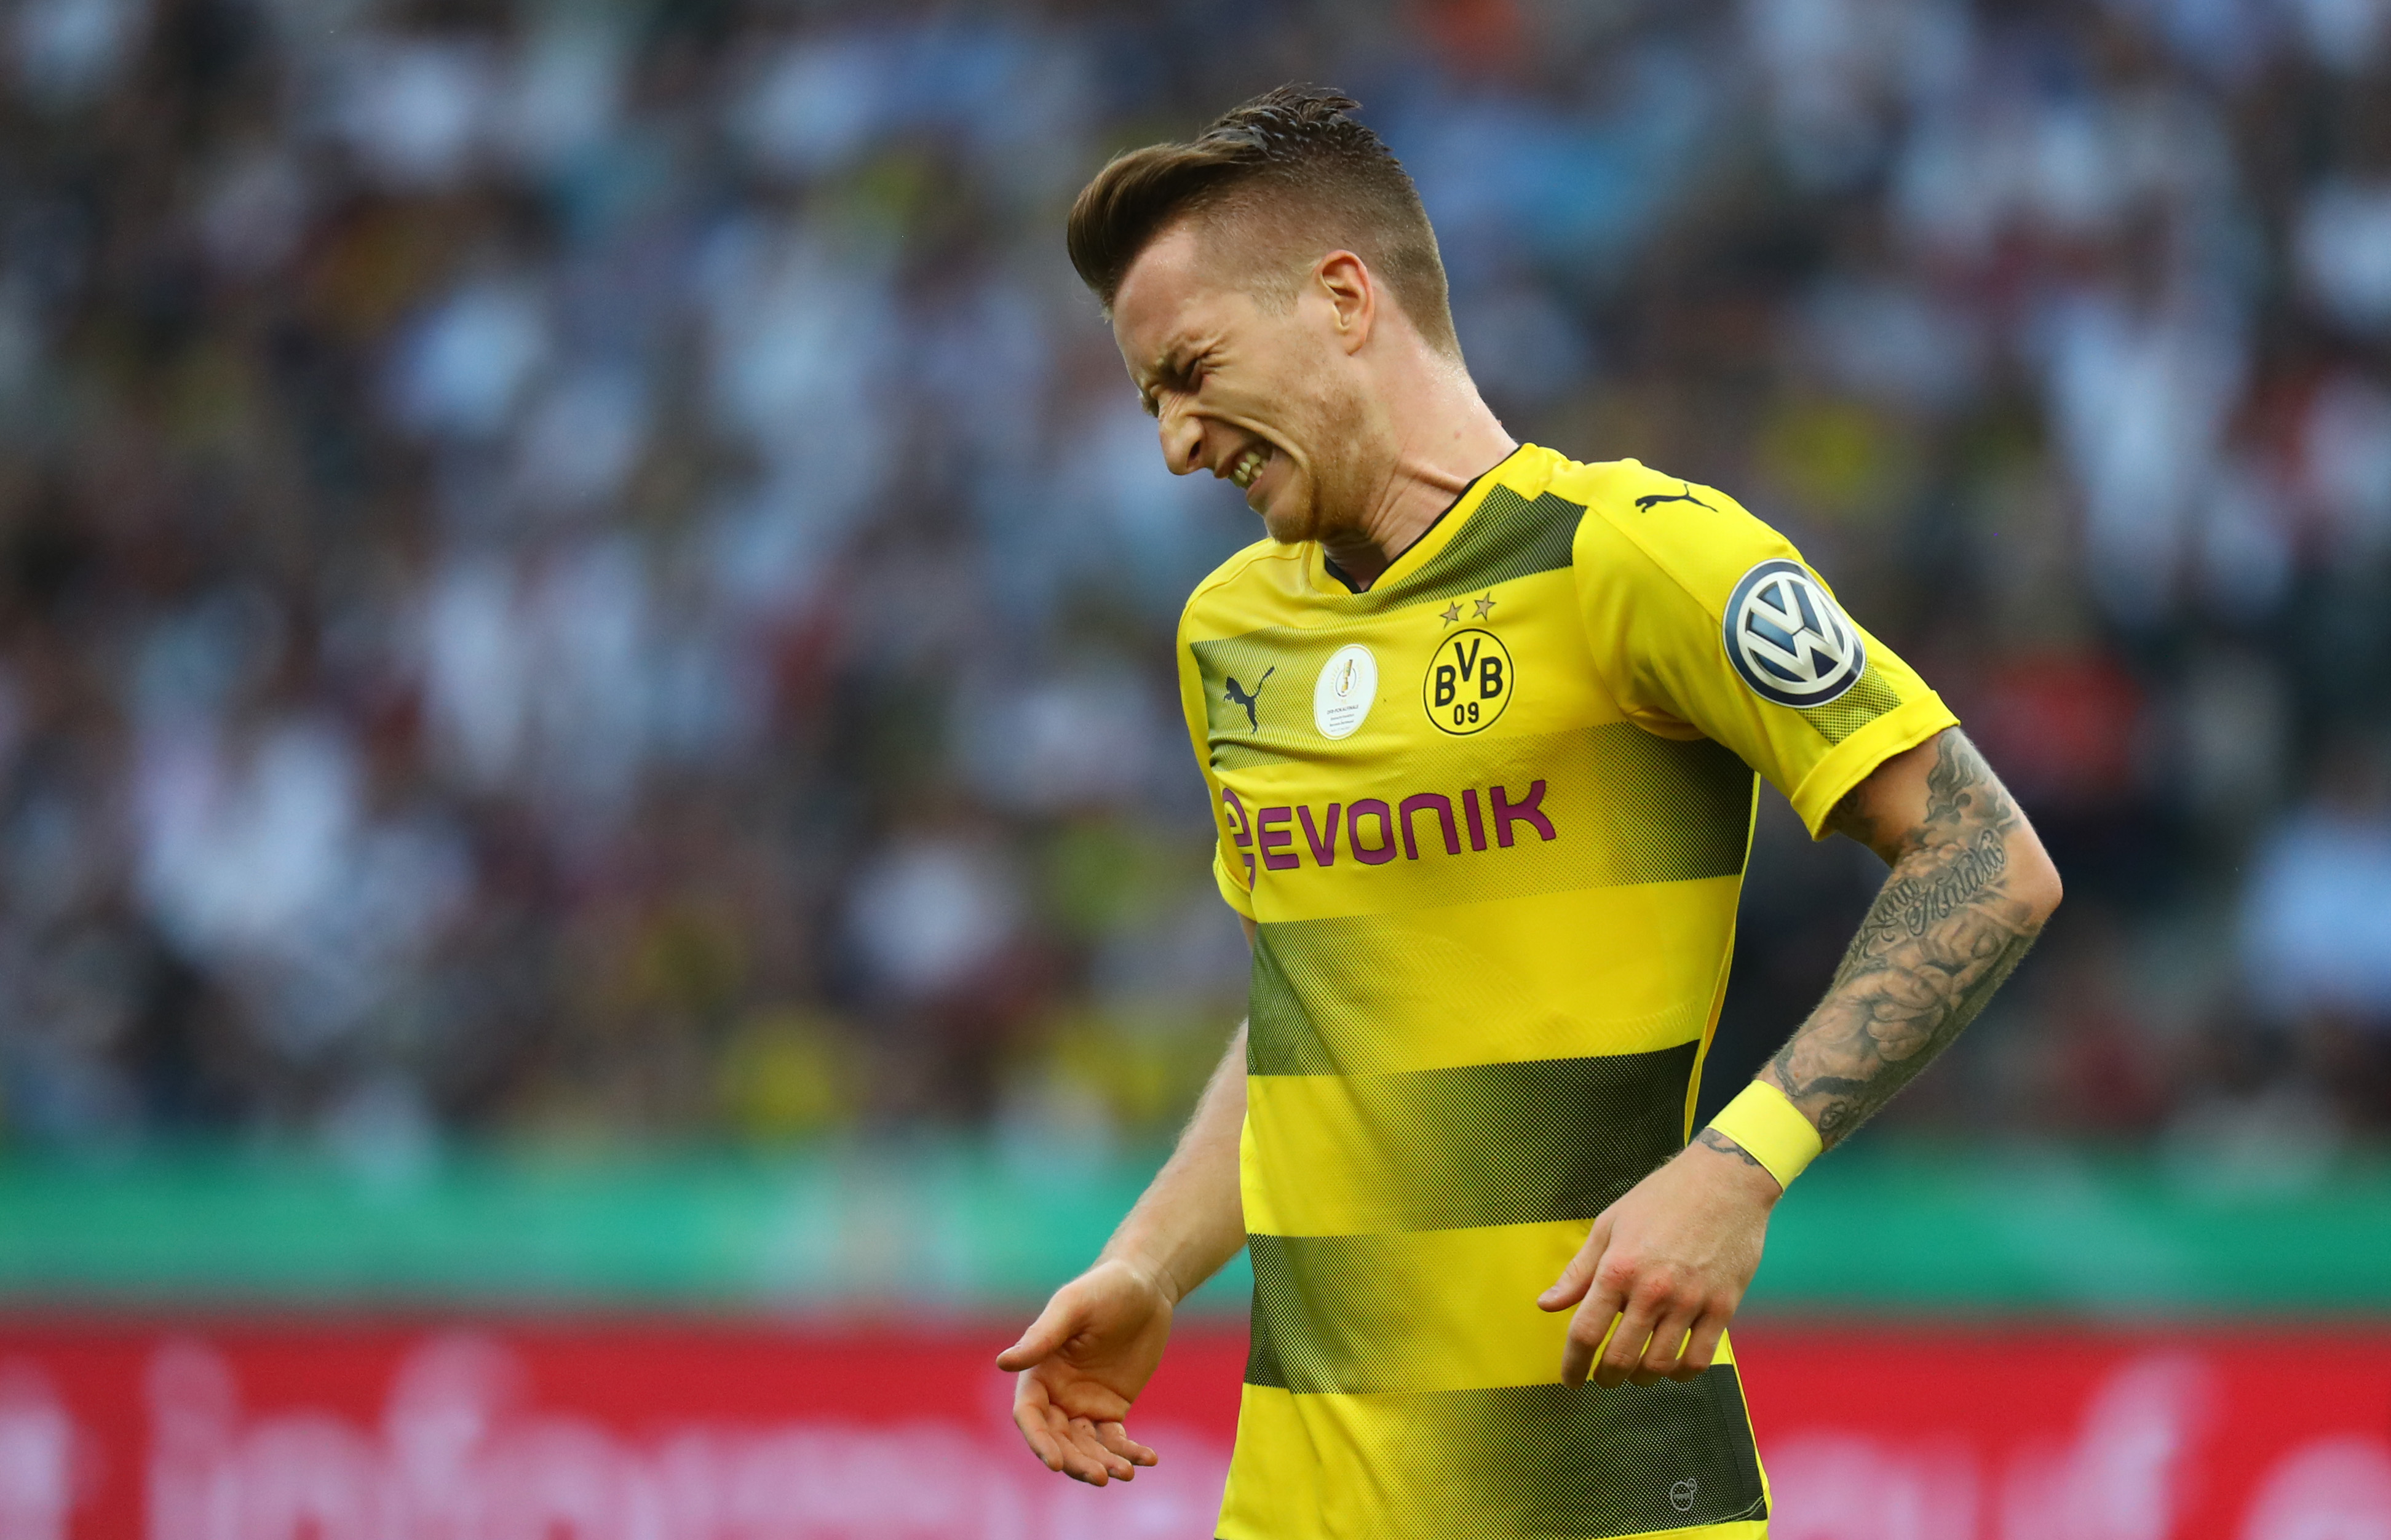 Football: Dortmund's Reus out for 'several months' with ligament tear